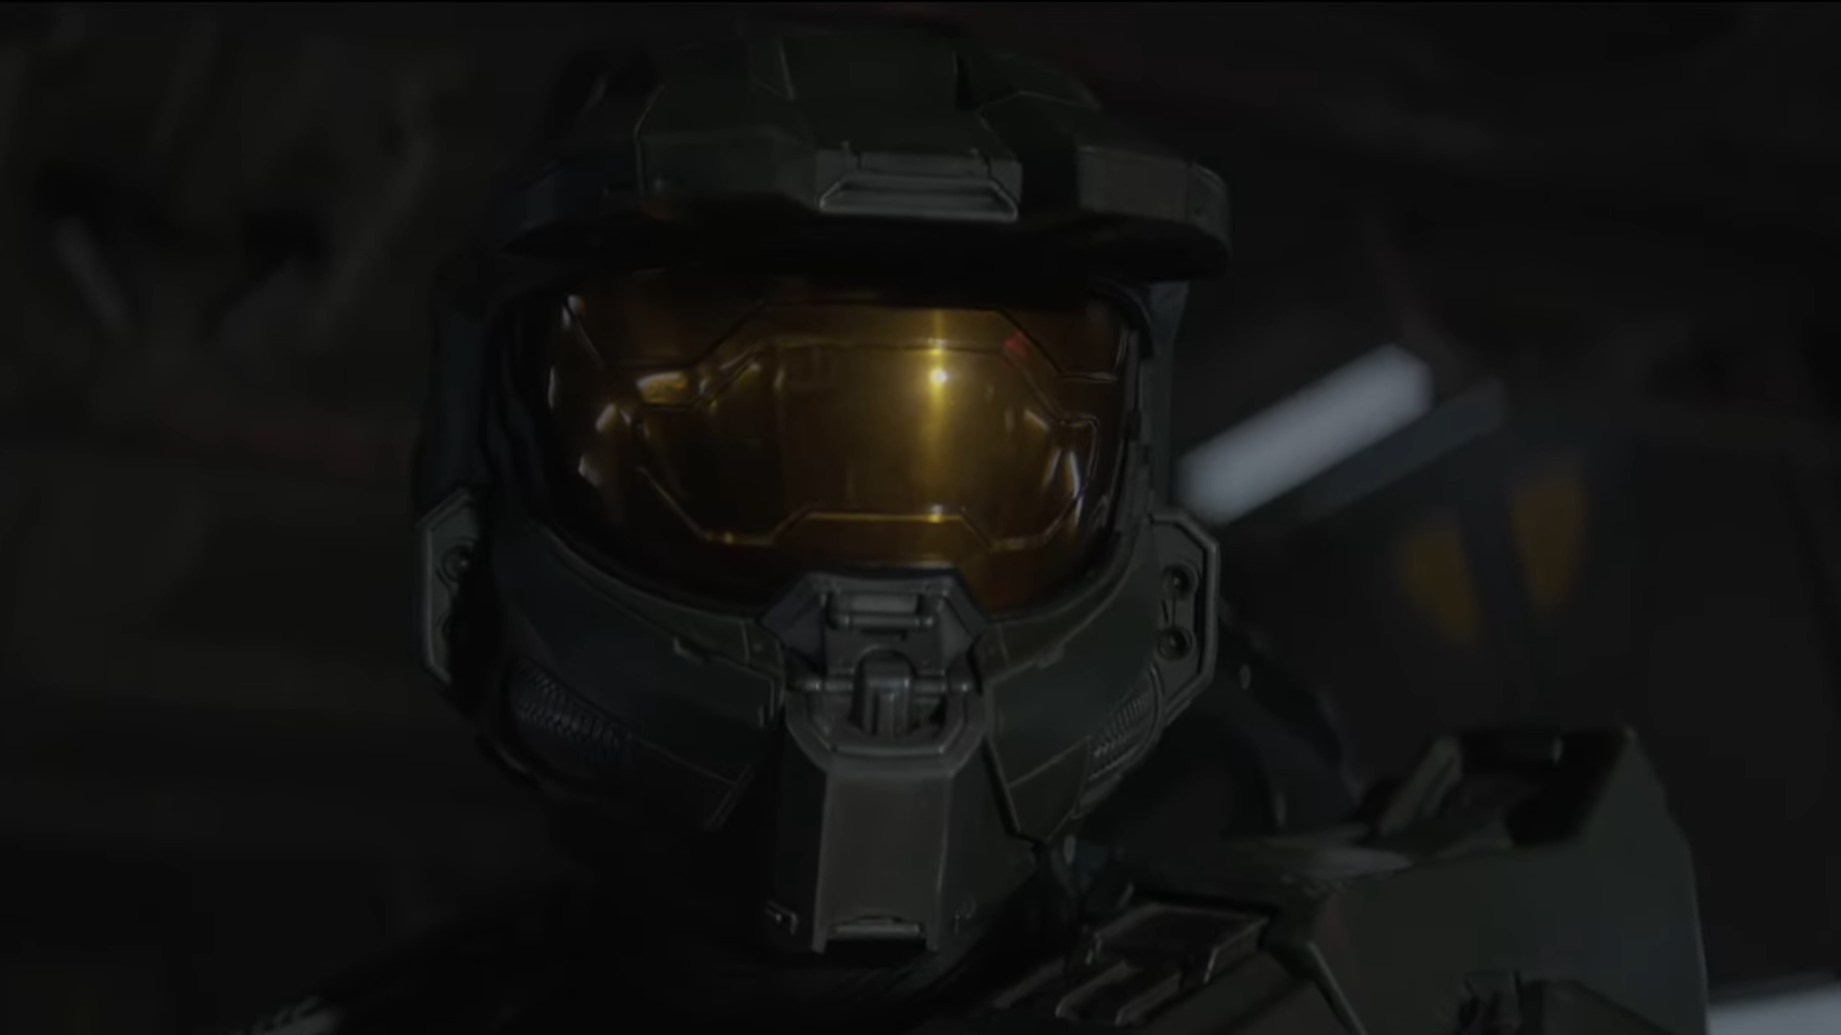 Halo Season 2's New Trailer Brings the Fall of Reach to Life, and Death